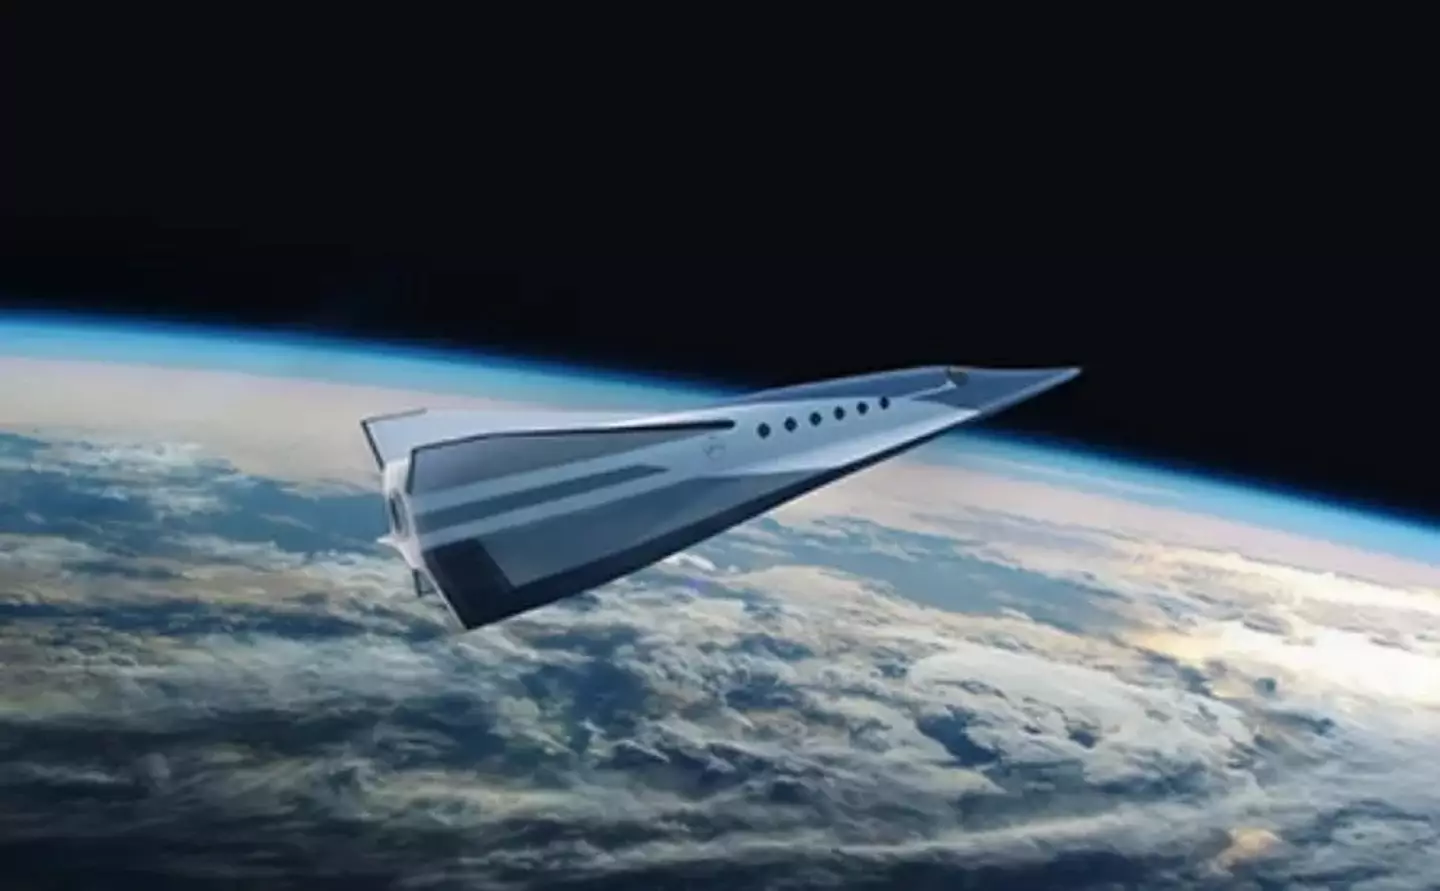 A crewed test flight is planned for 2025 if all goes to plan.